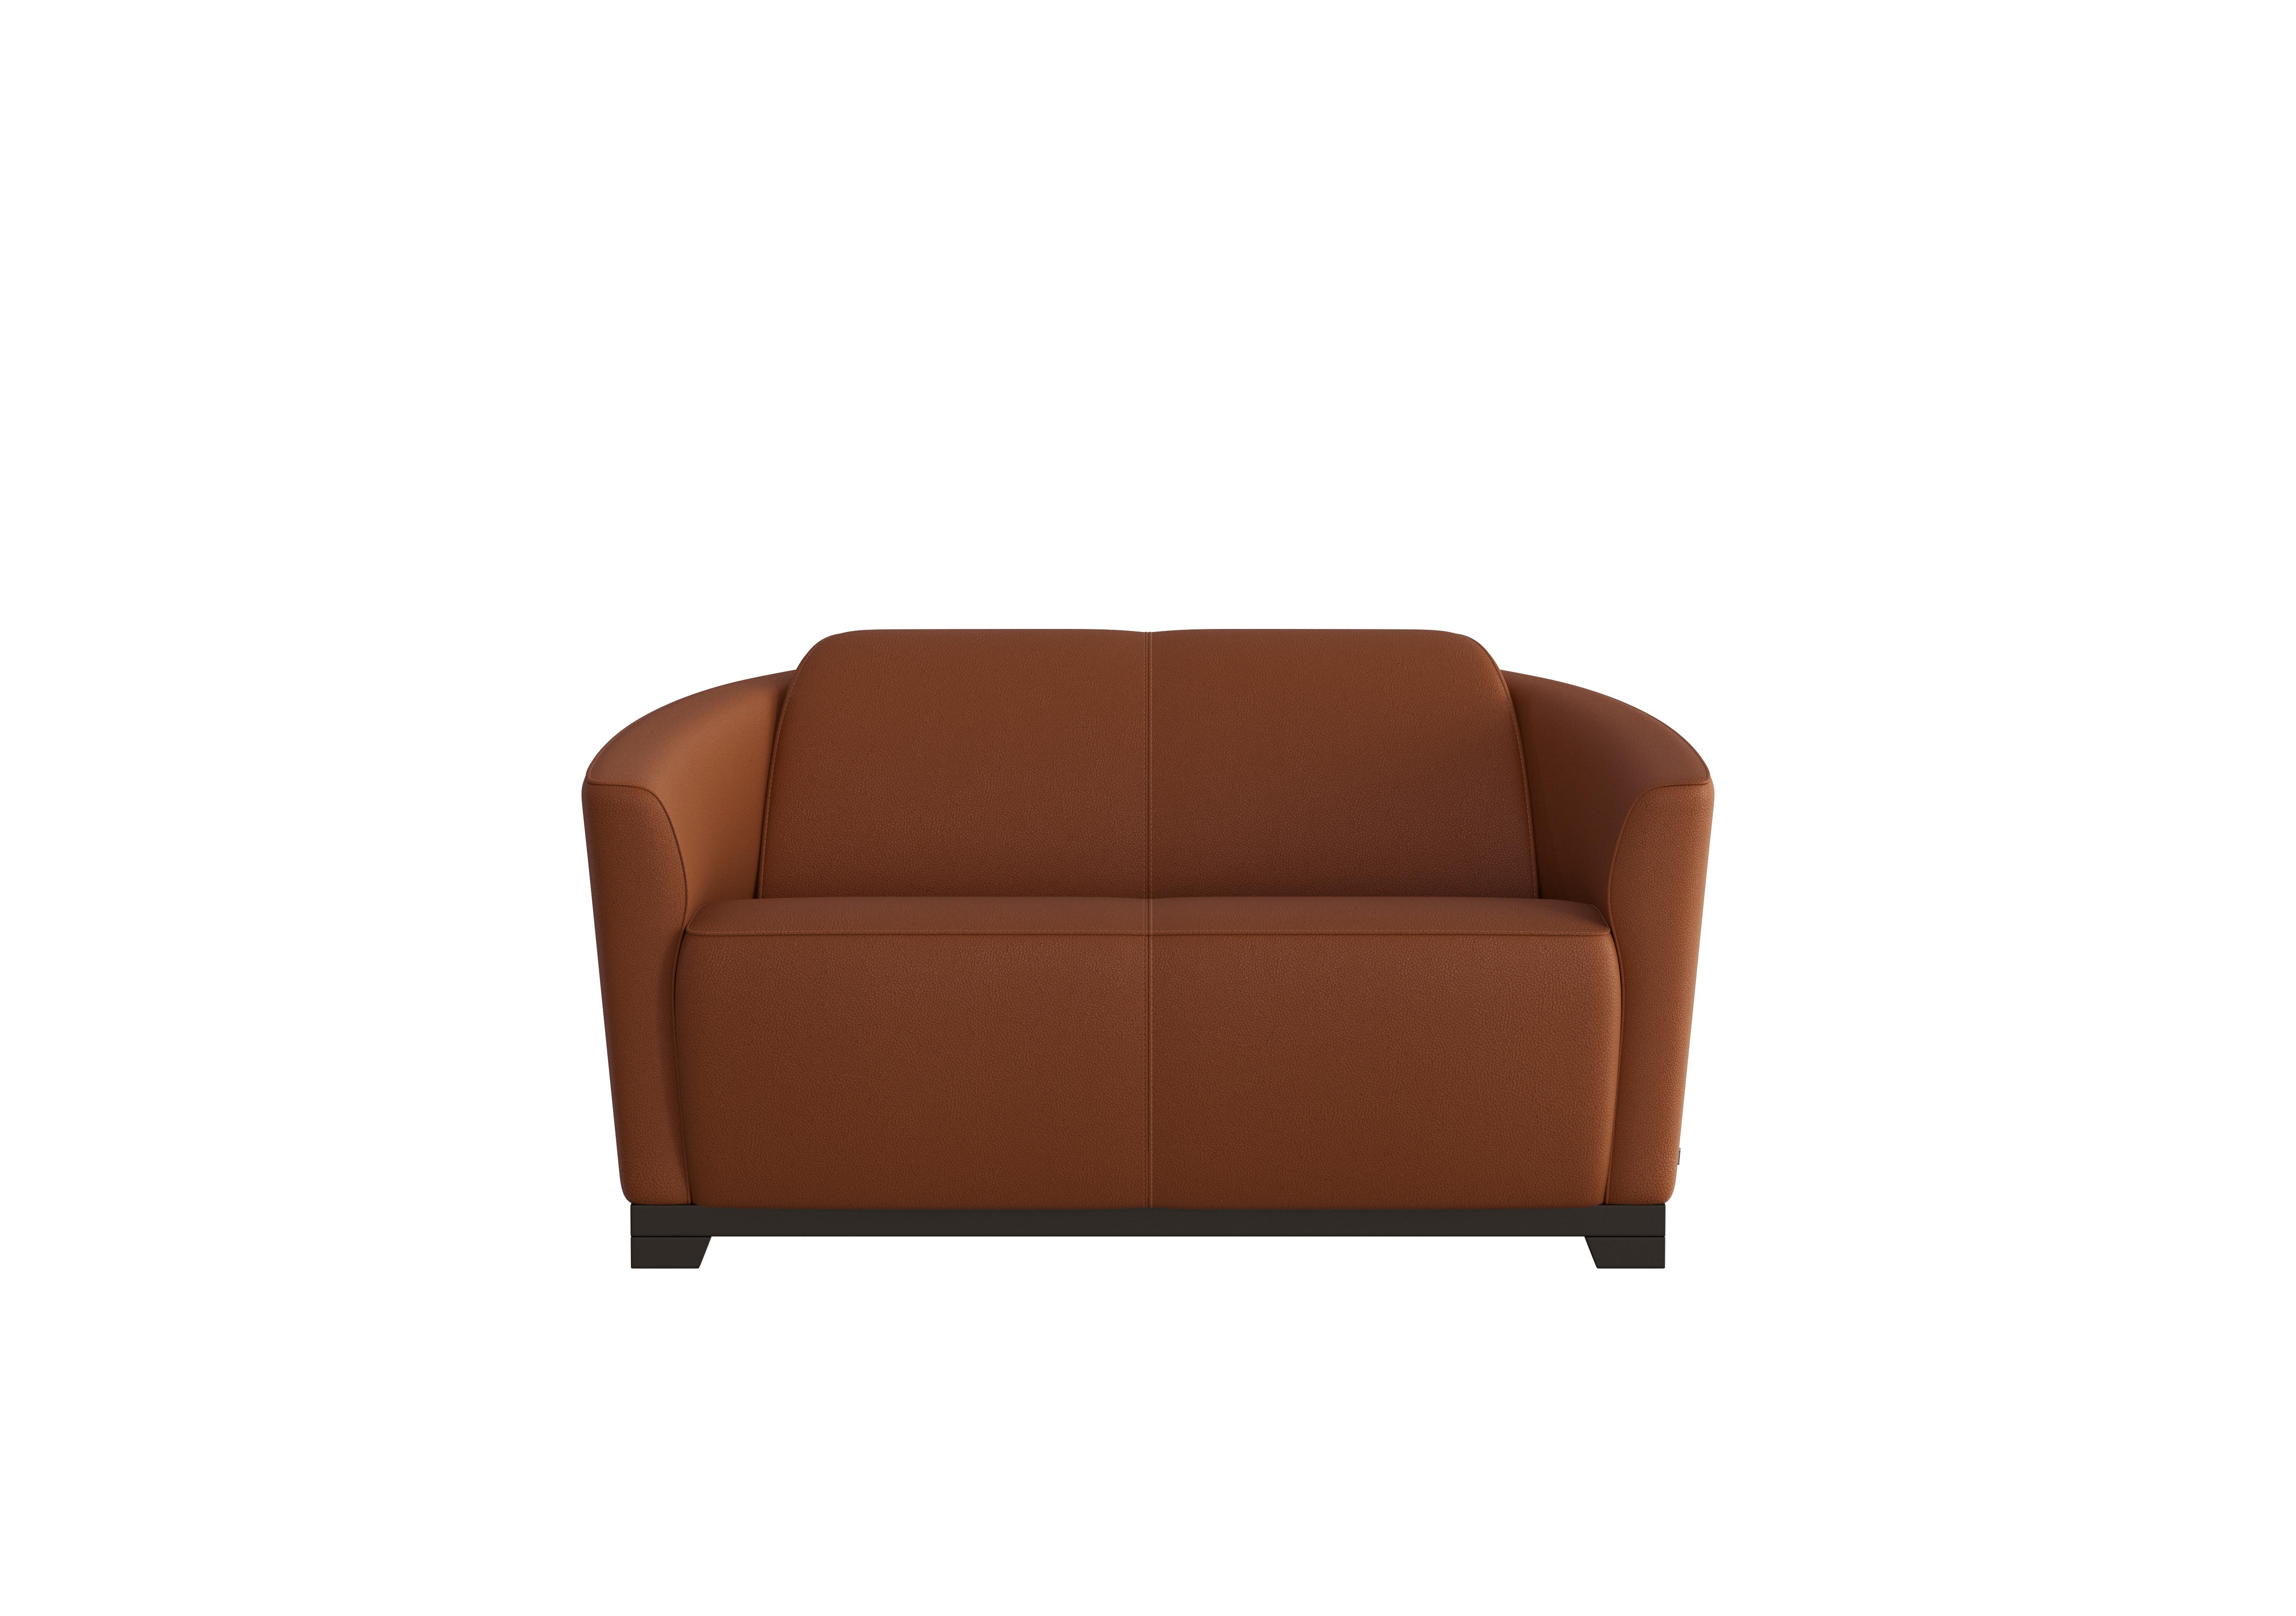 Ketty 2 Seater Leather Sofa in Botero Cuoio 2151 on Furniture Village